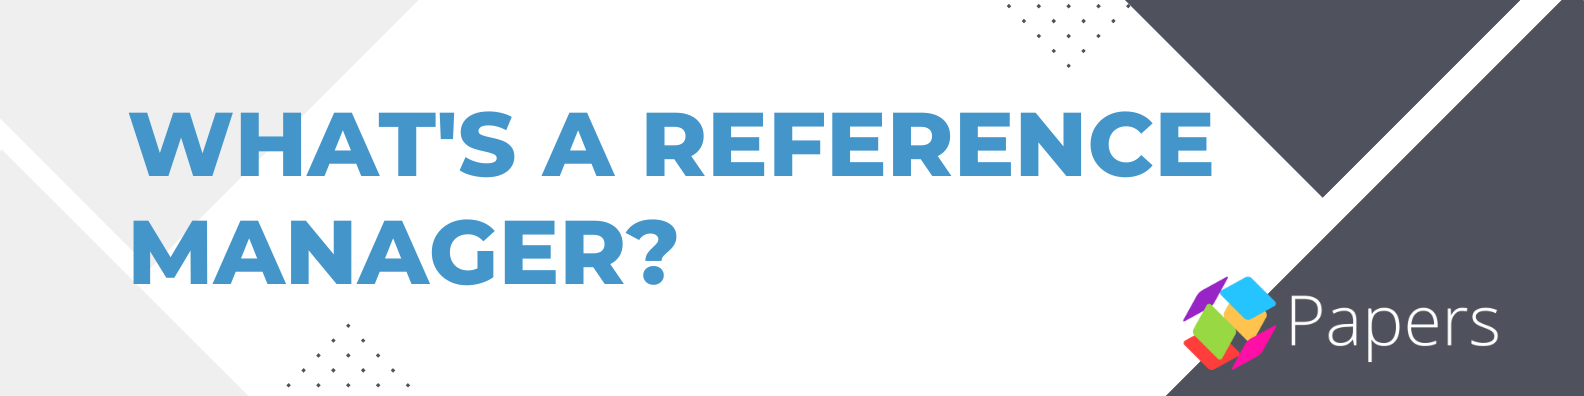 what is a reference manager? blog header